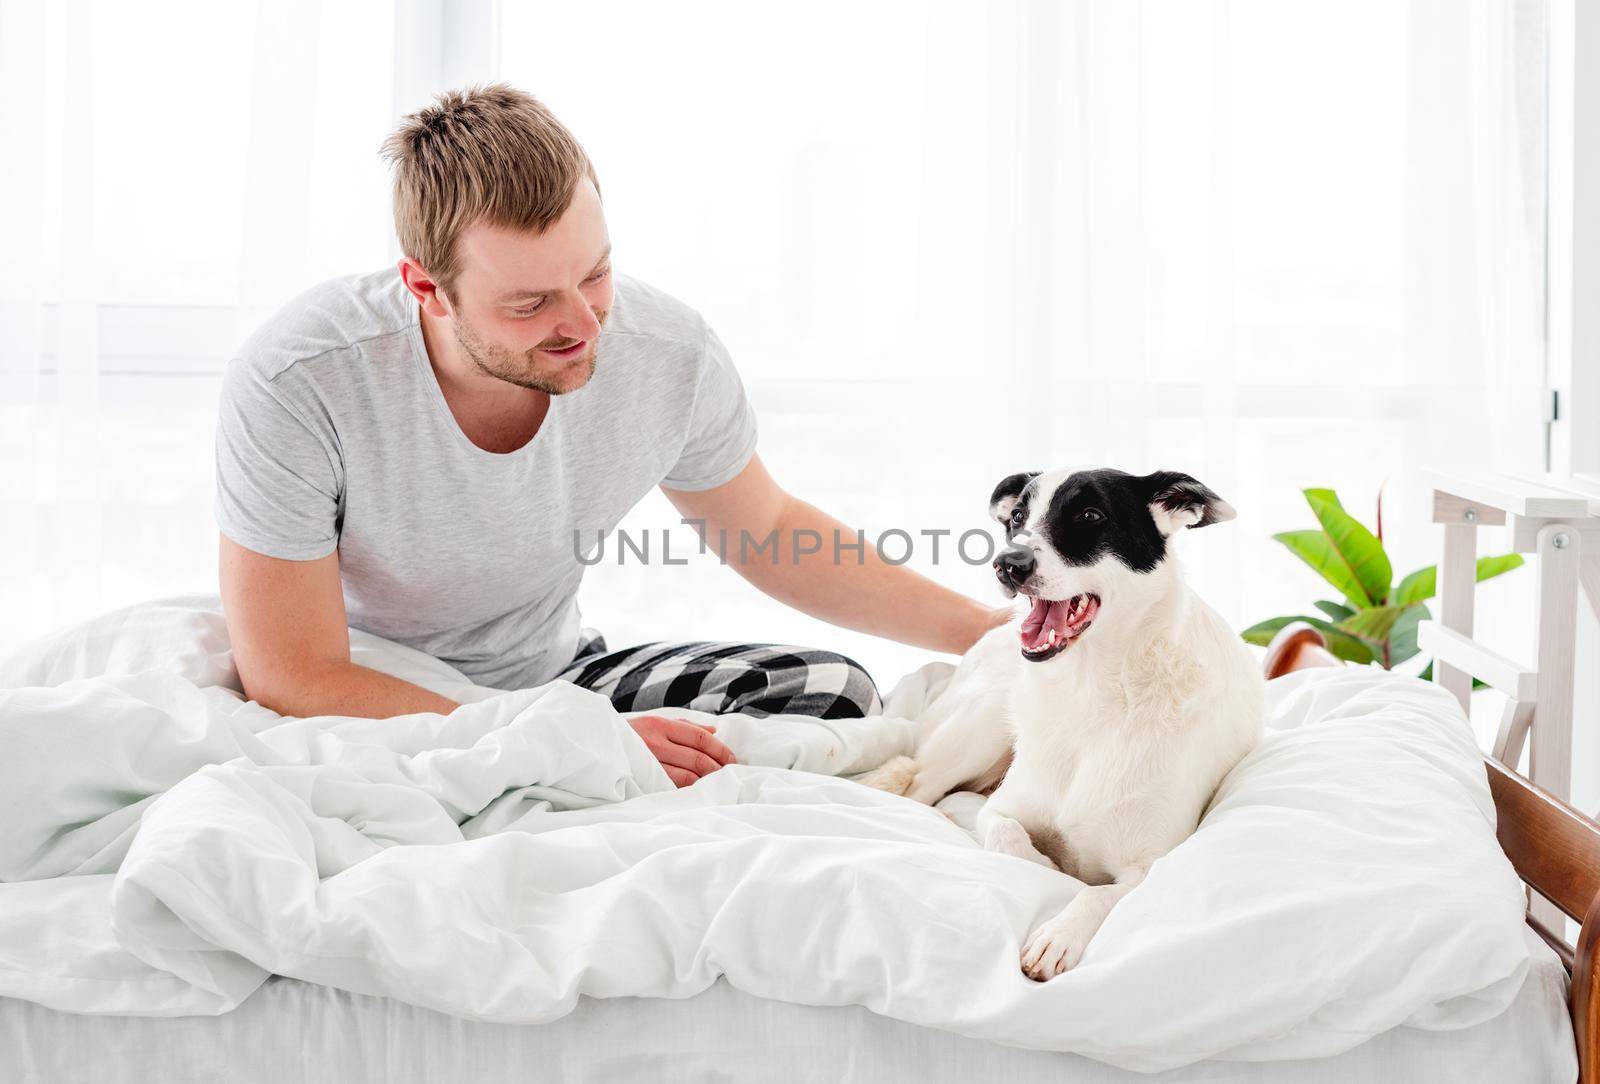 Man with dog in the bed by tan4ikk1